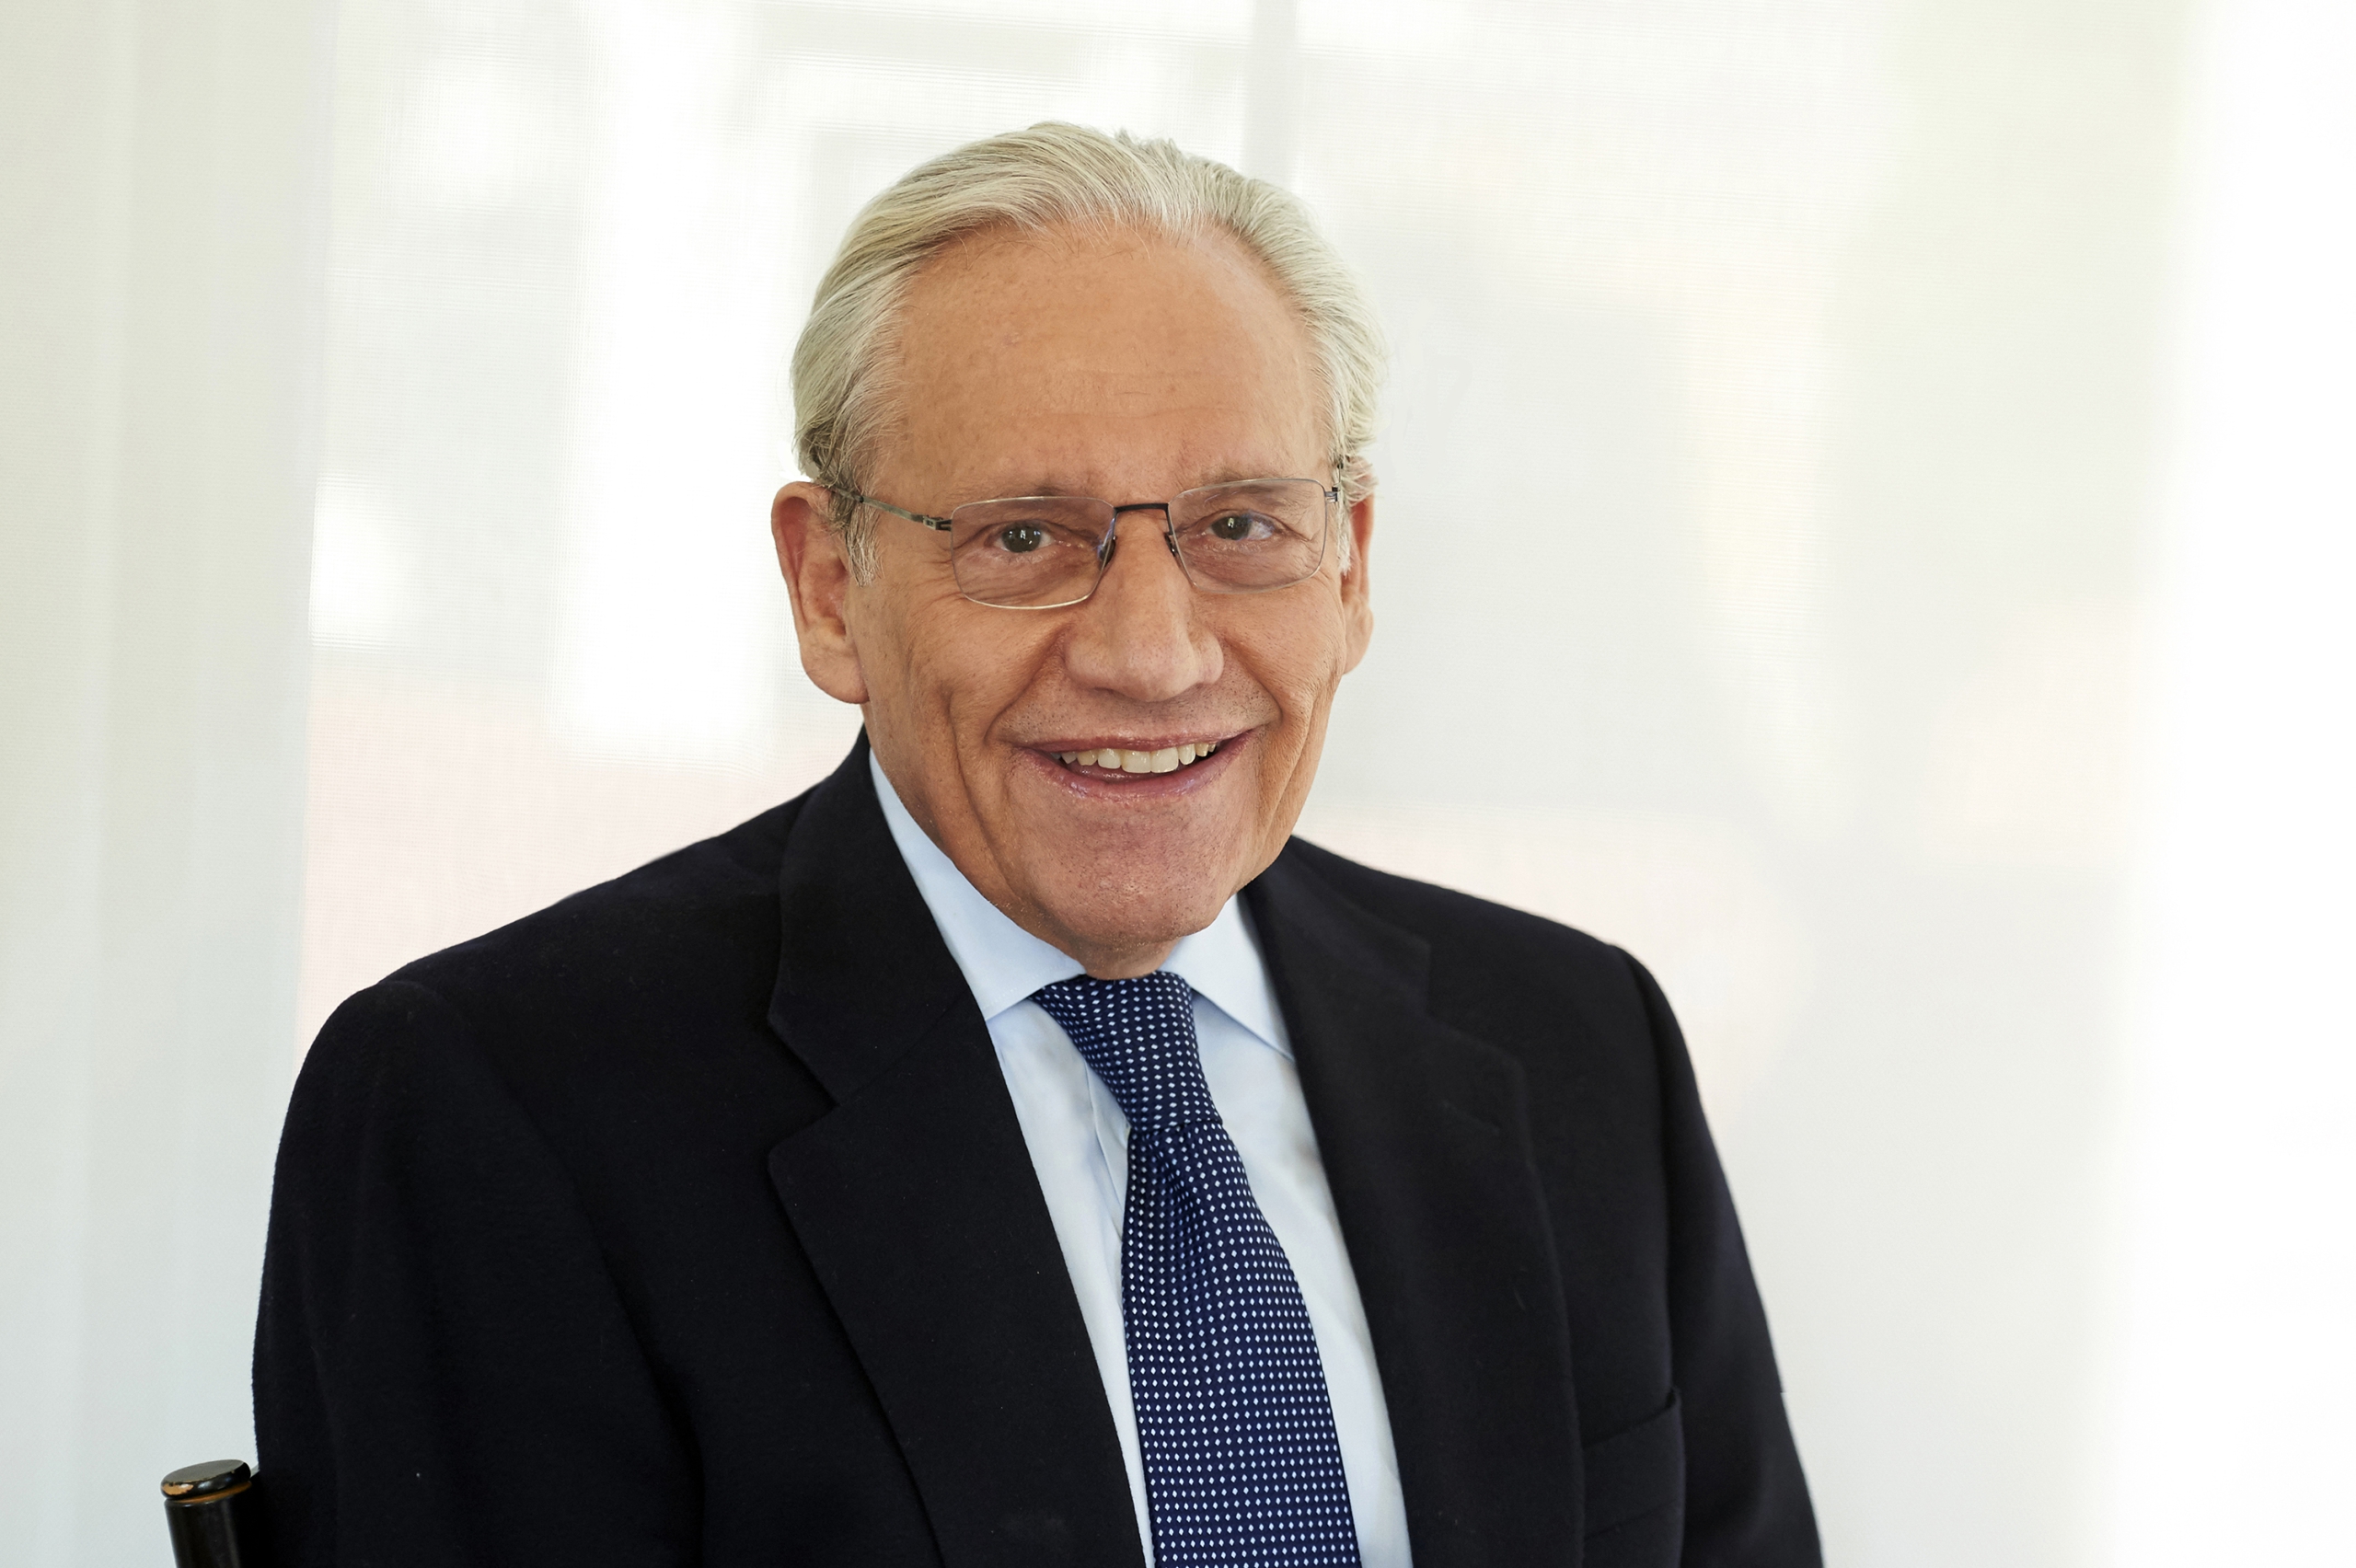 A head and shoulders photograph of Bob Woodward in a suit and tie.